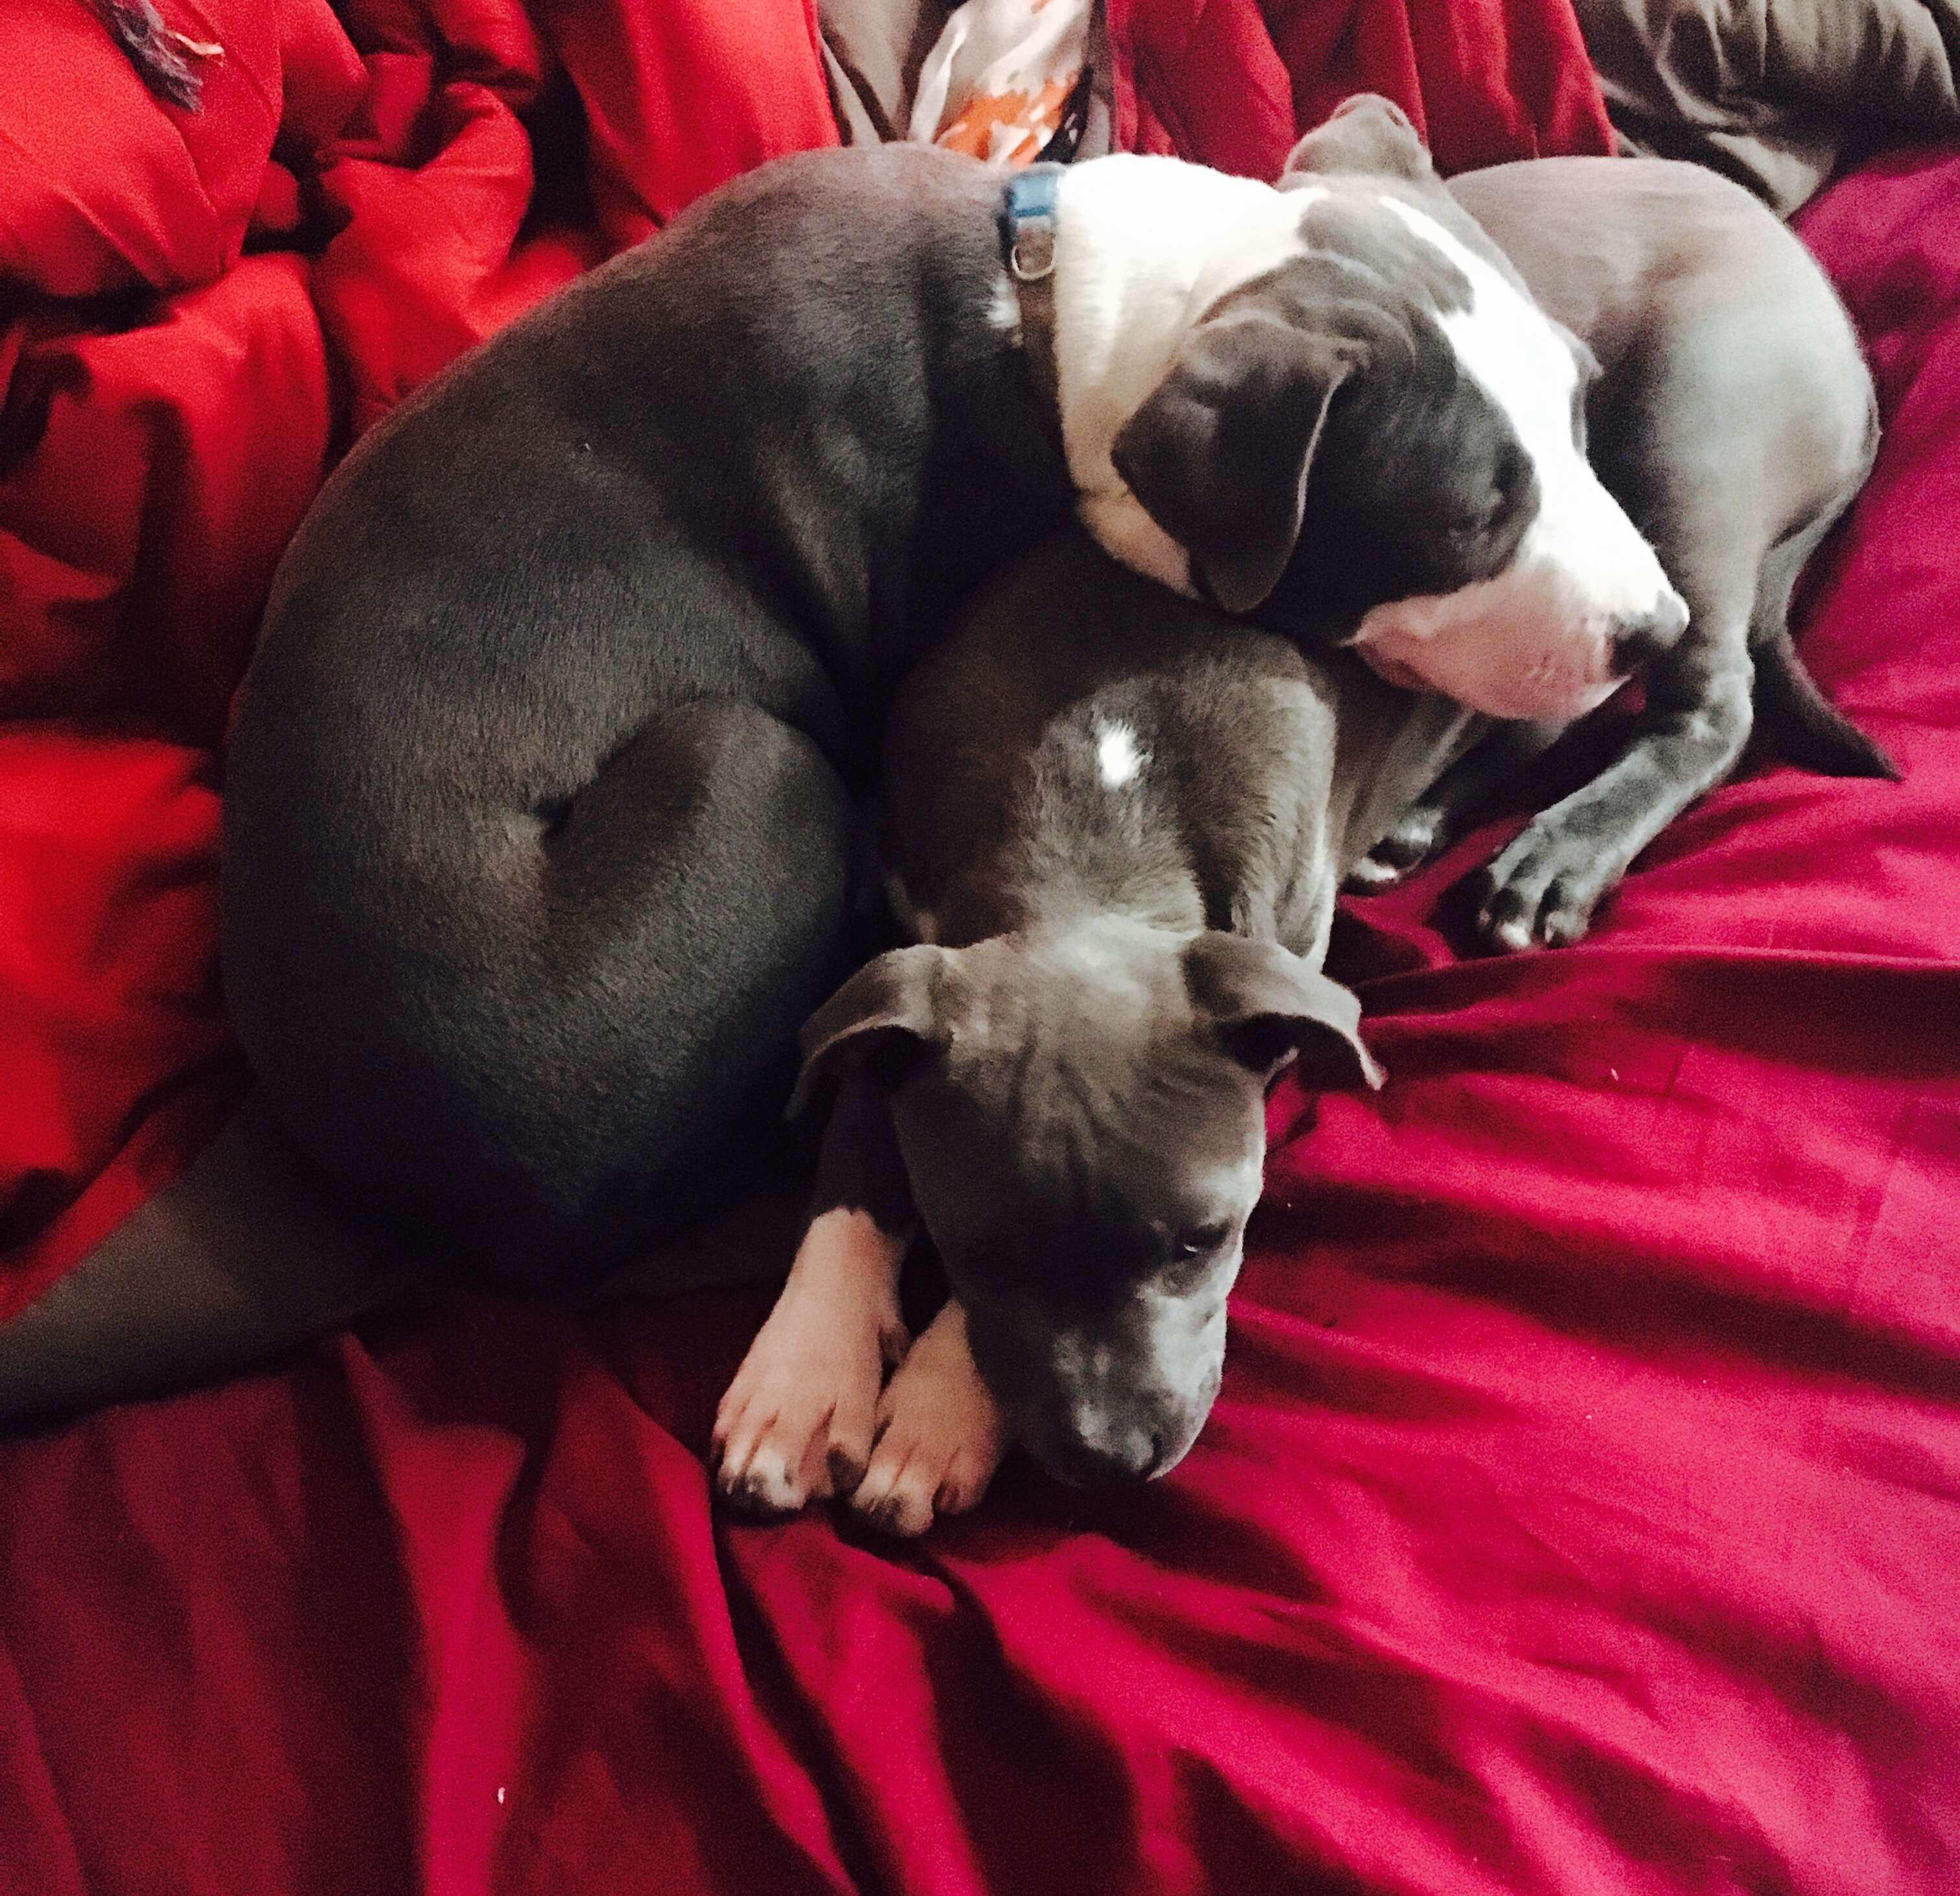 Puppies snuggling together